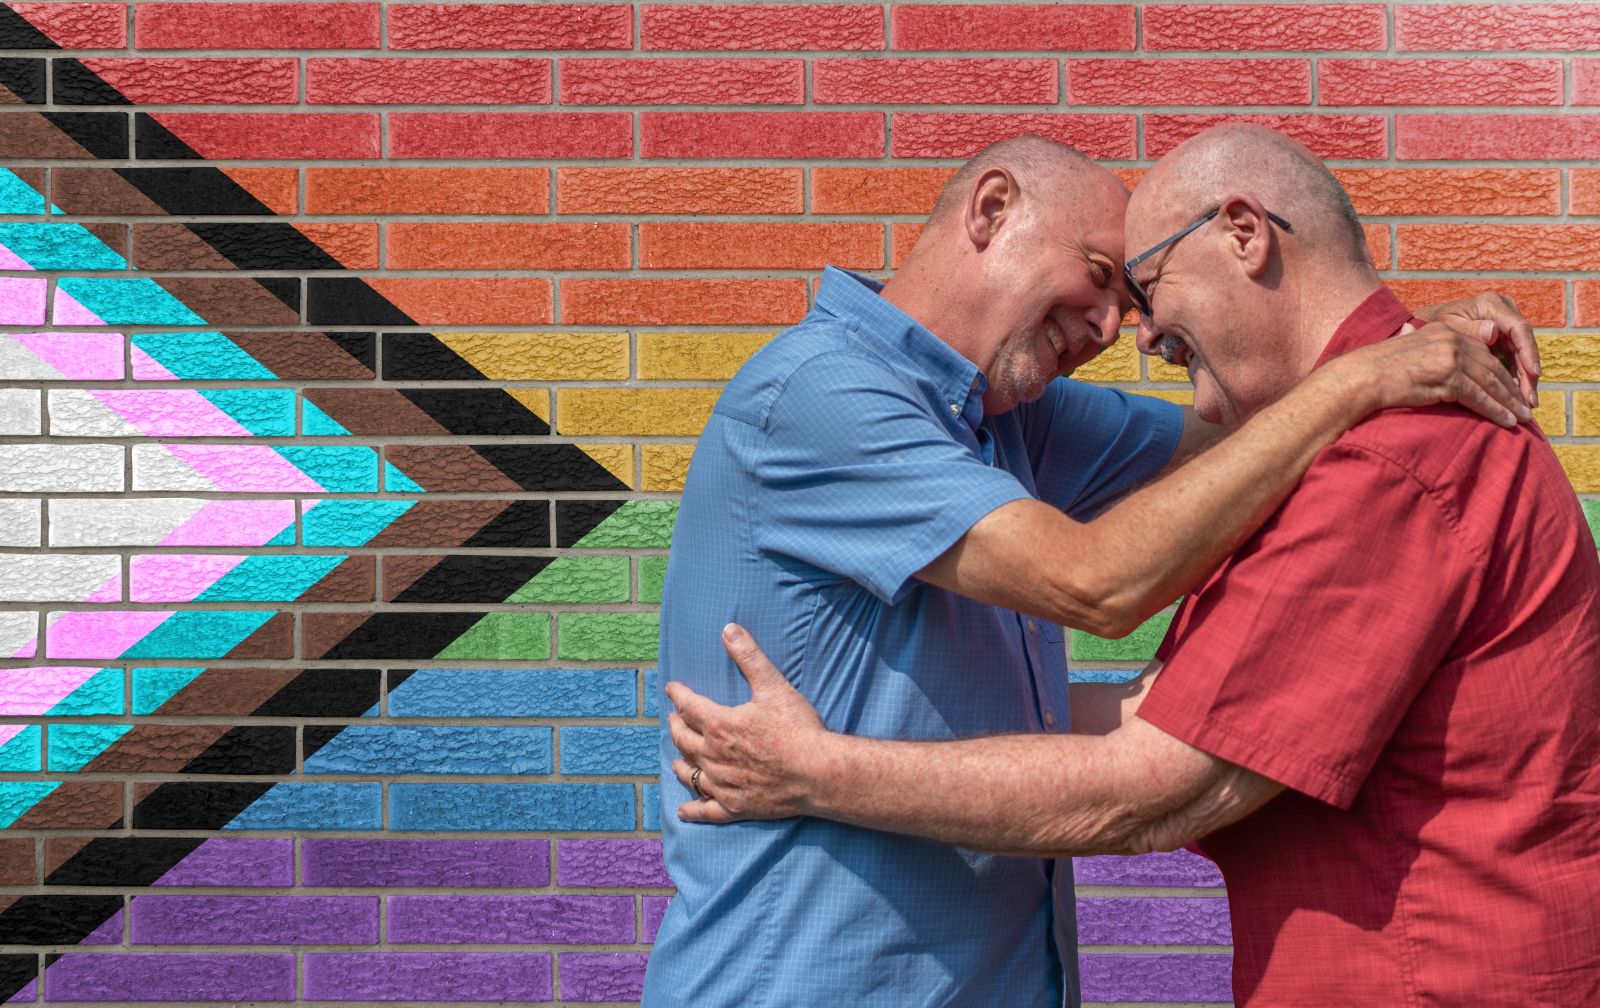 Mature gay couple embrace in front of a brick wall painted with the LGBT progressive pride rainbow flag